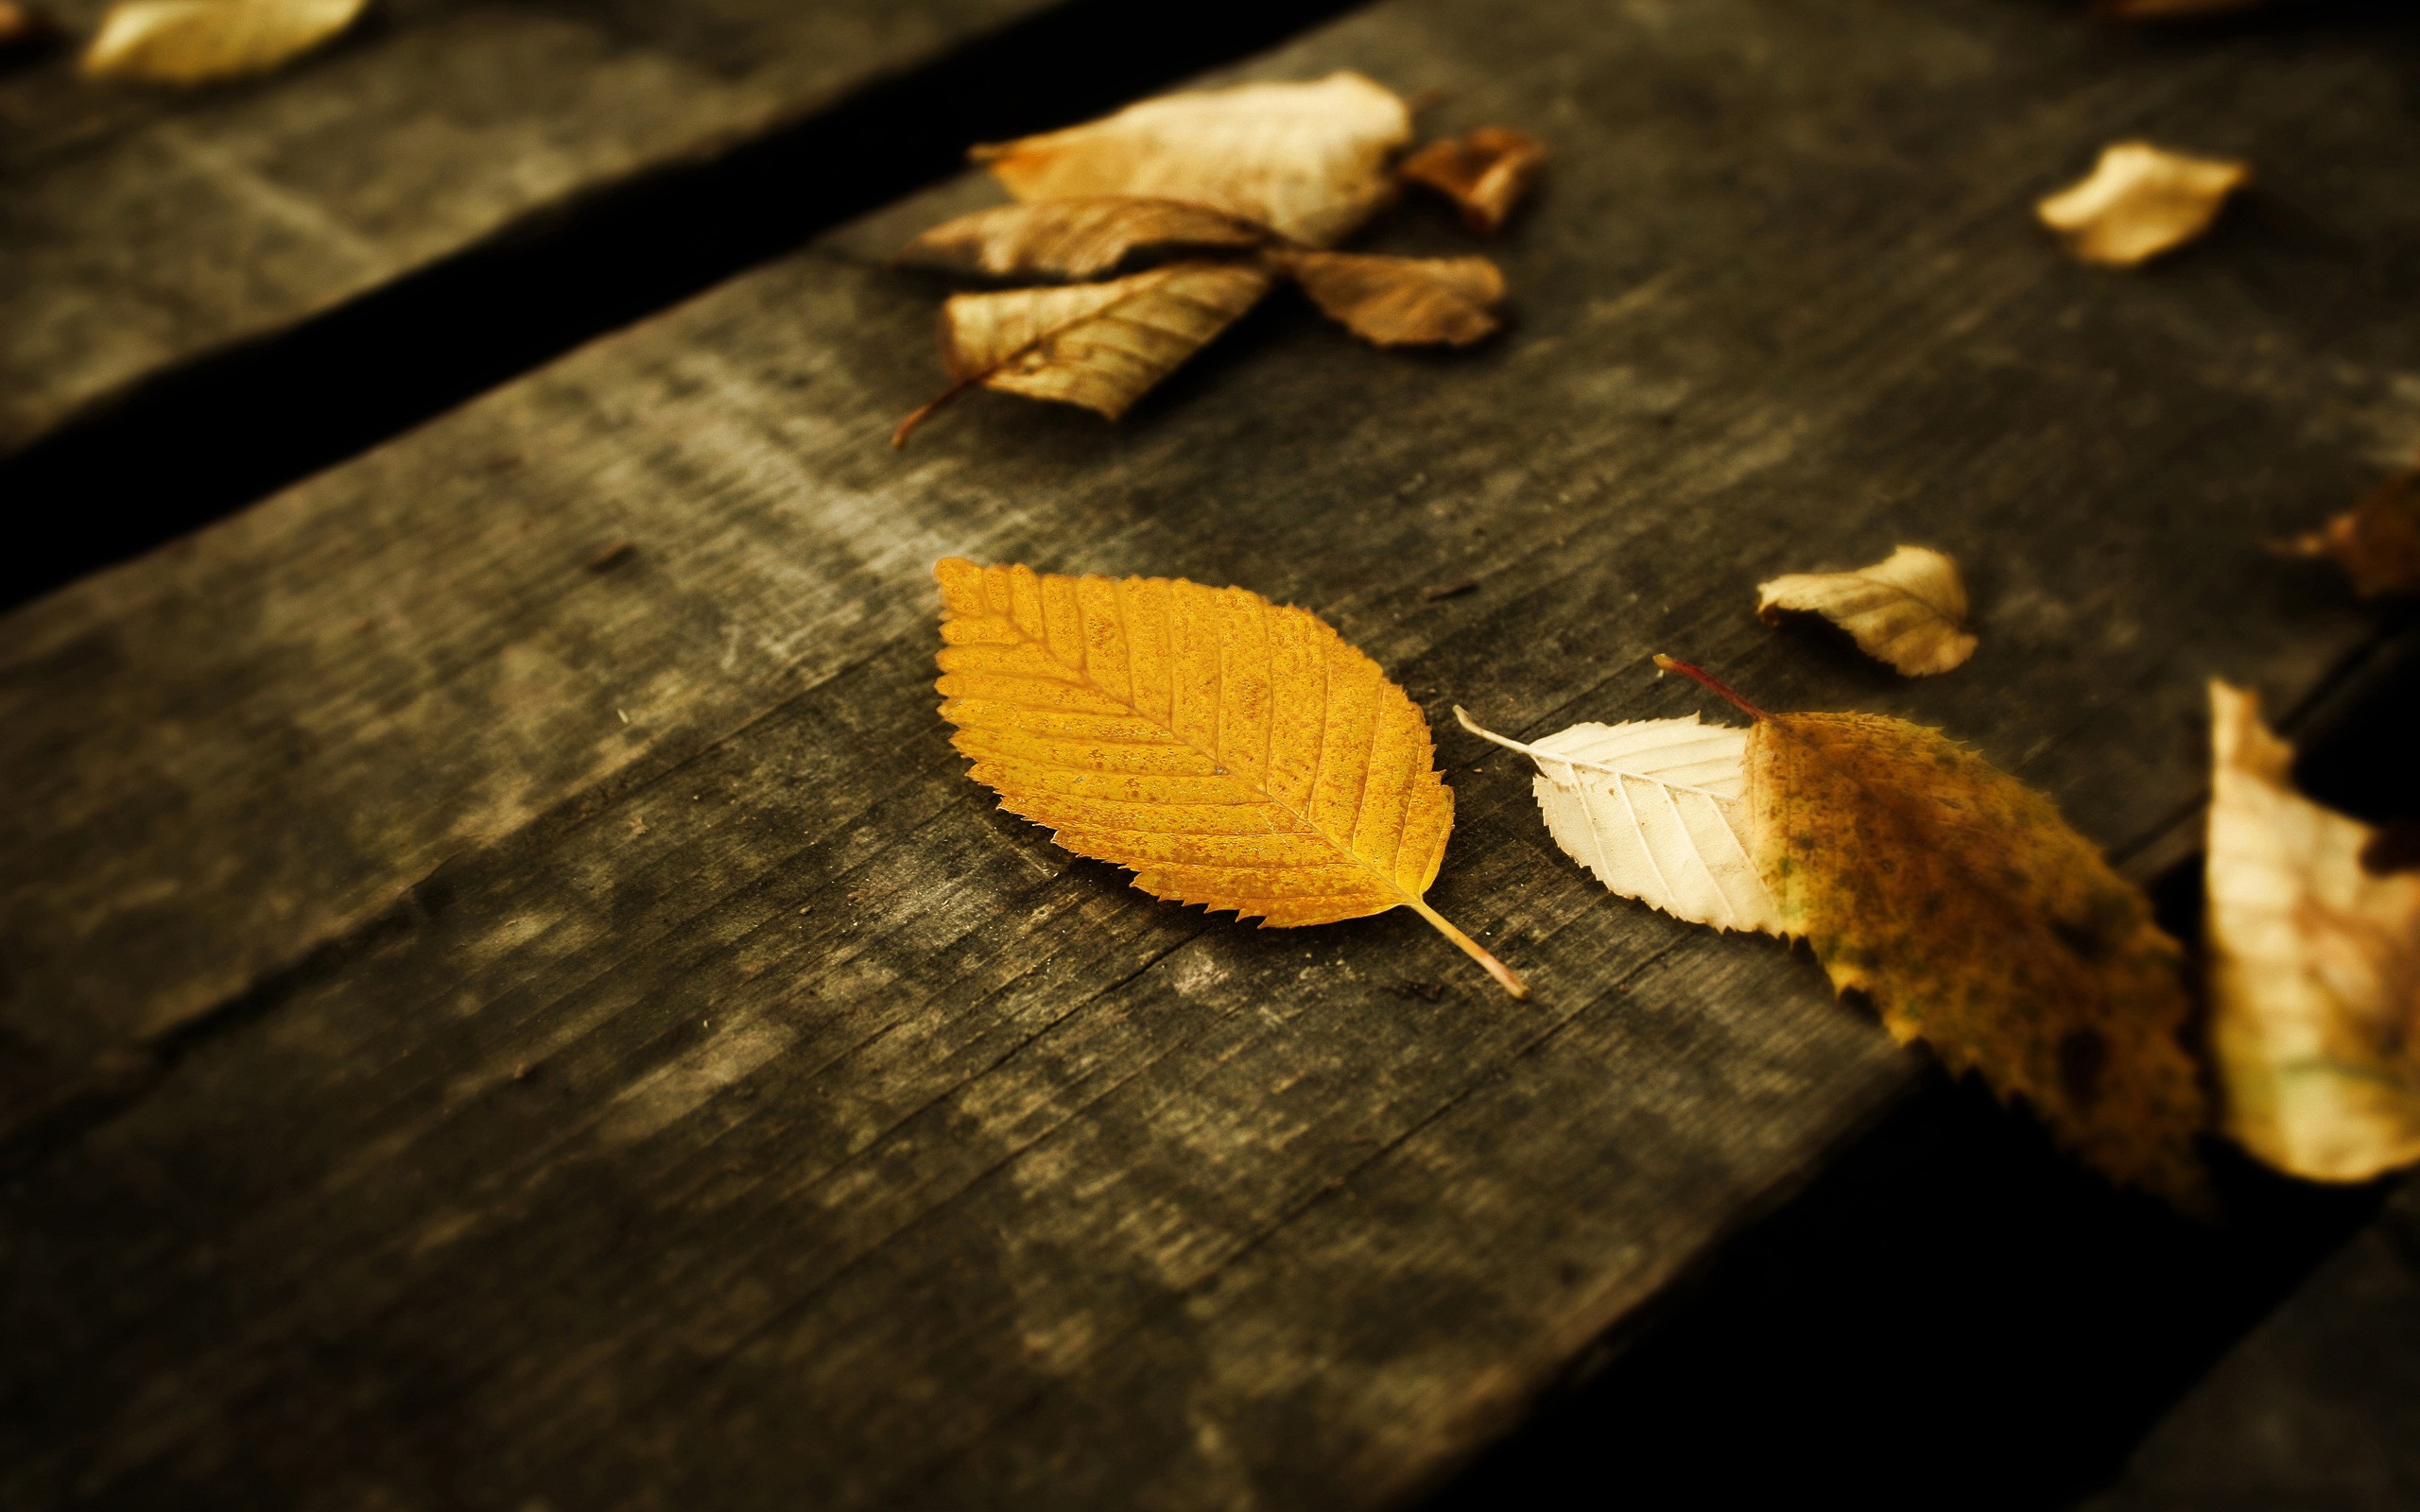 General 2560x1600 fall leaves wood plants wooden surface texture fallen leaves